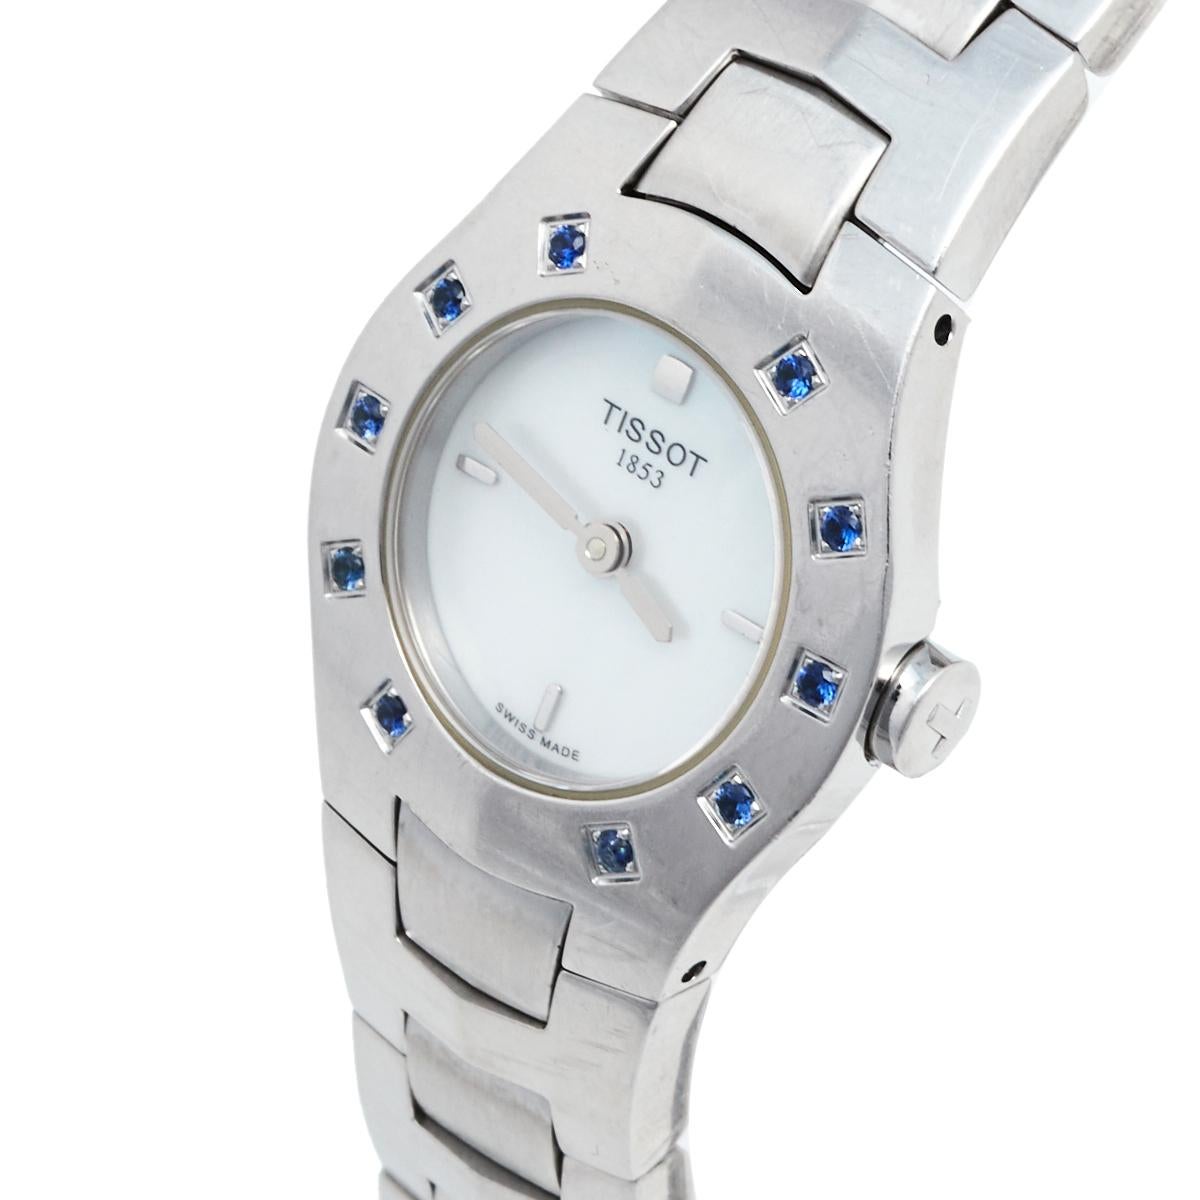 Tissot watches are impressions of contemporary times, while they exude a charm that is timeless. This L521.112 watch is one such piece! It comes crafted from stainless steel with a round case having a diameter of 23 mm. The mother of pearl dial is